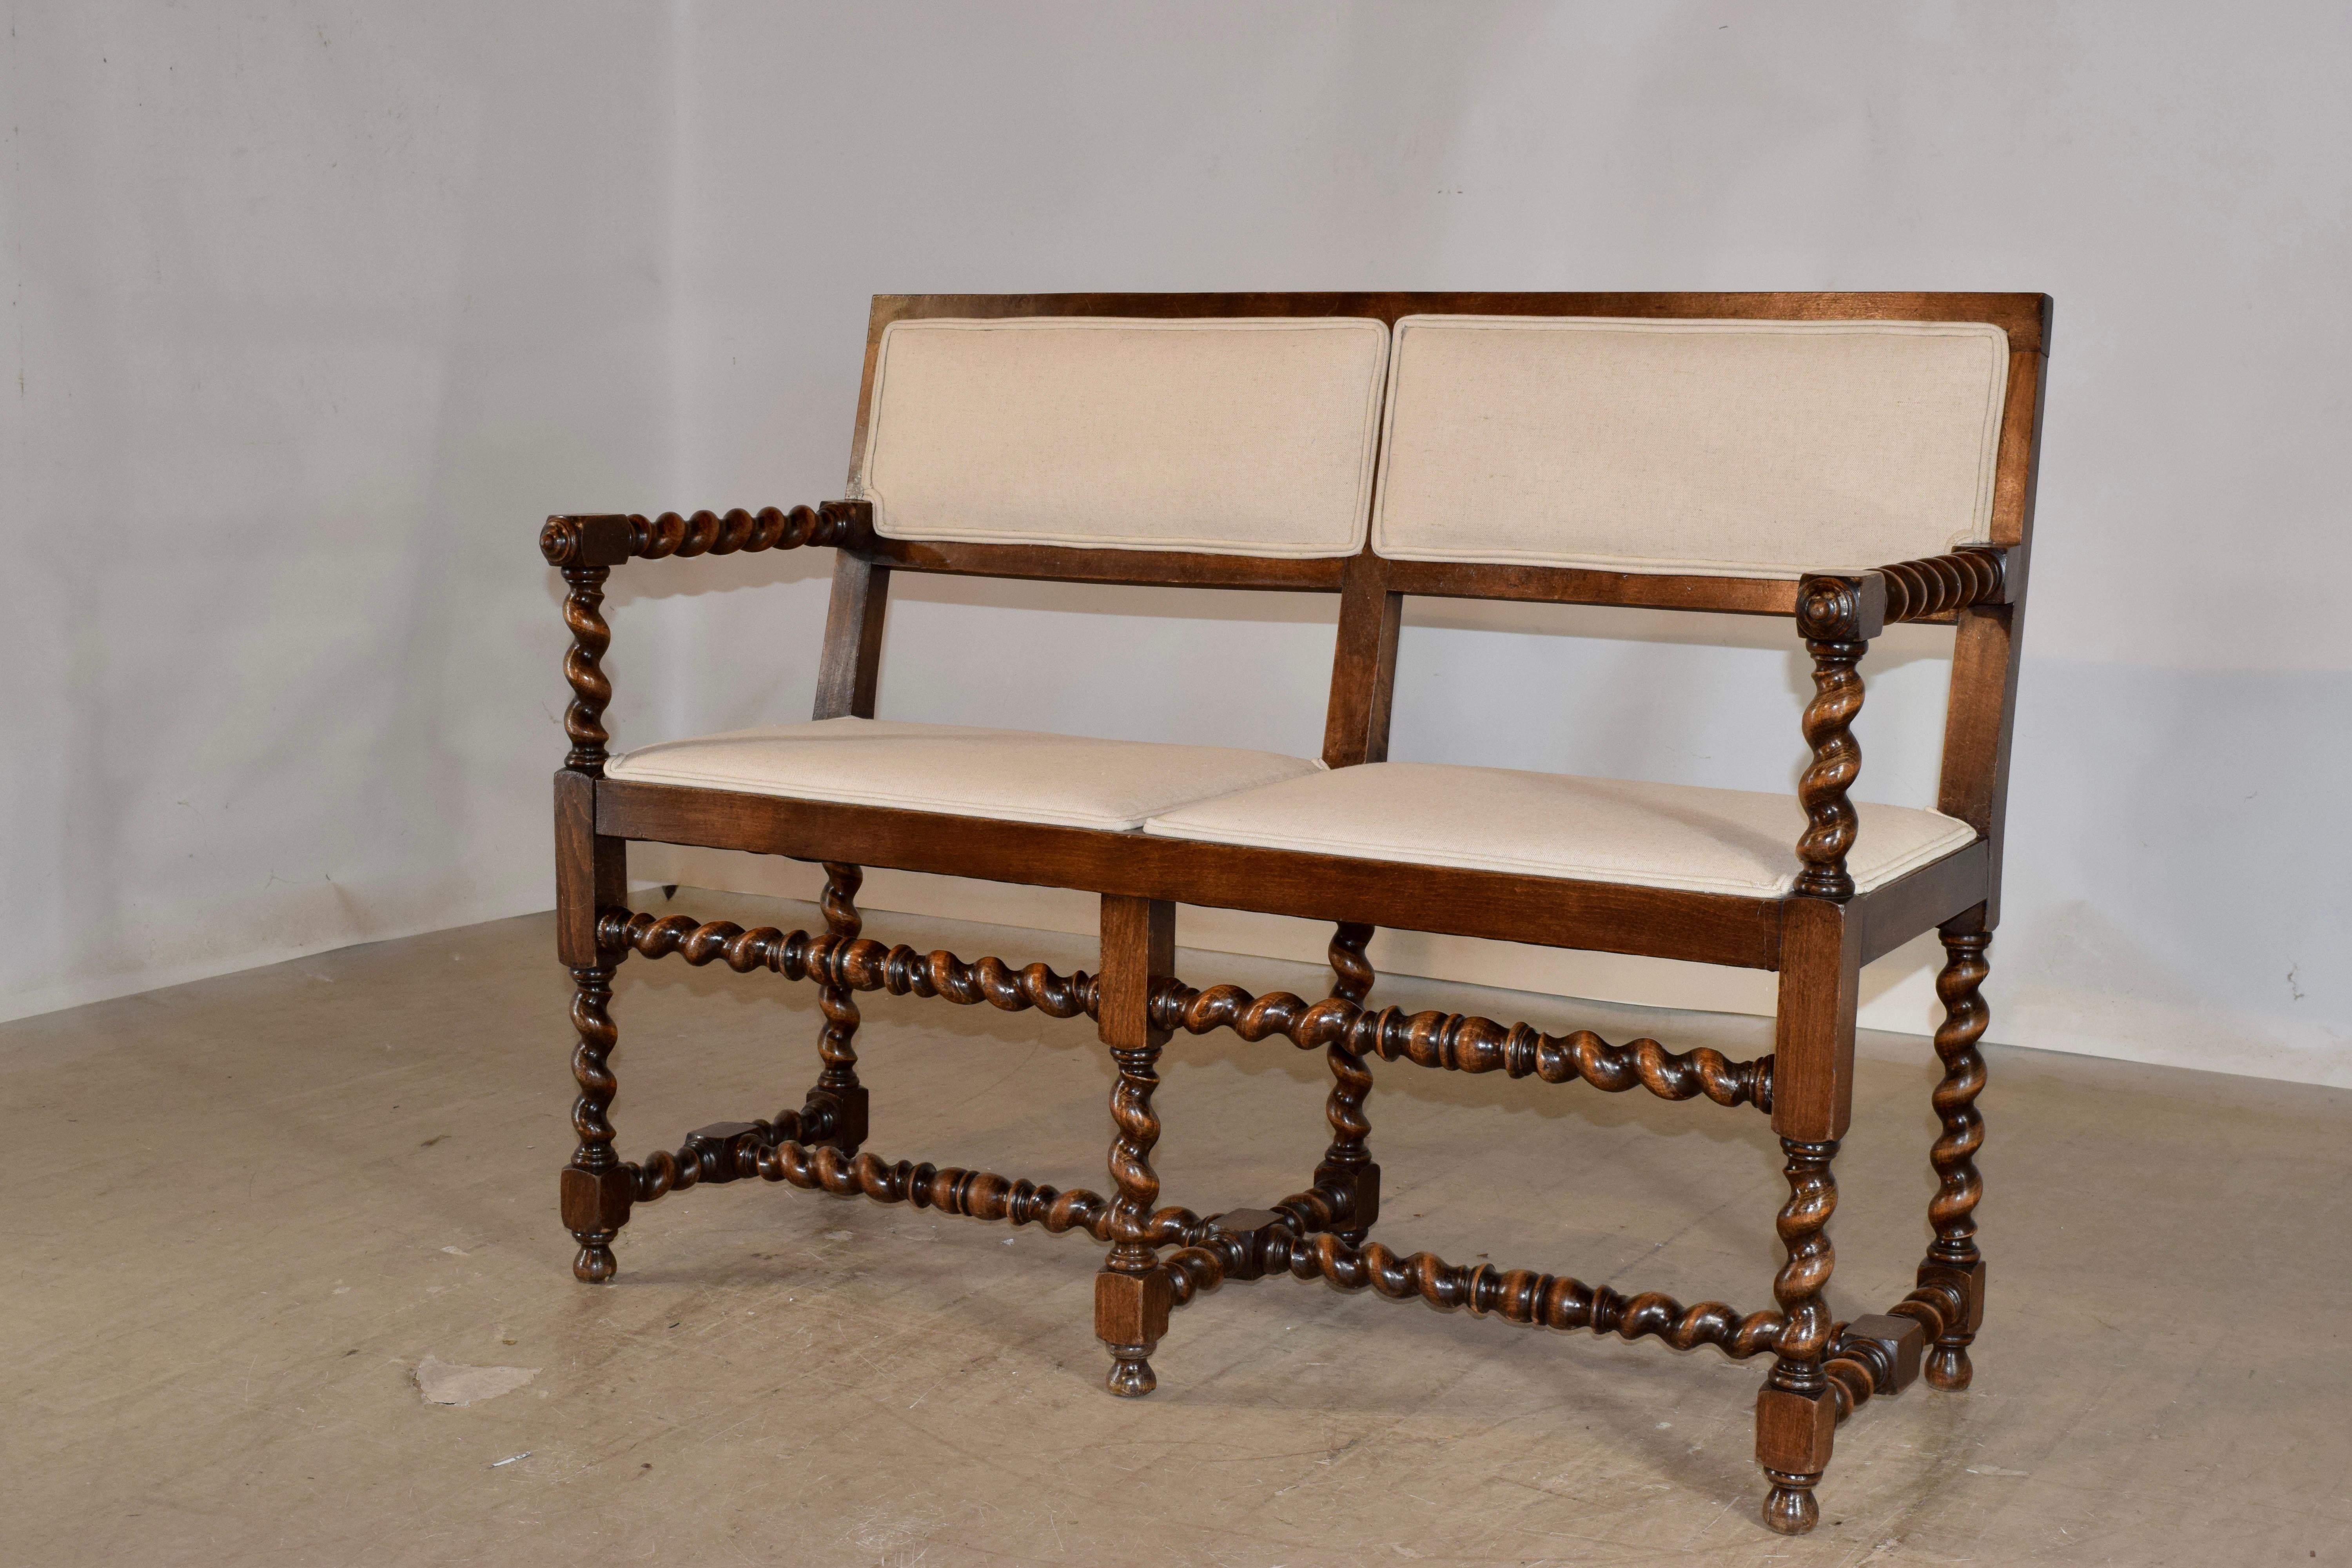 19th century oak bench from France with newly upholstered seat and back. The frame is lovely and solid and has beautifully hand turned barley twist arms, and the bench is supported on hand turned barley twist legs, joined by matching stretchers.